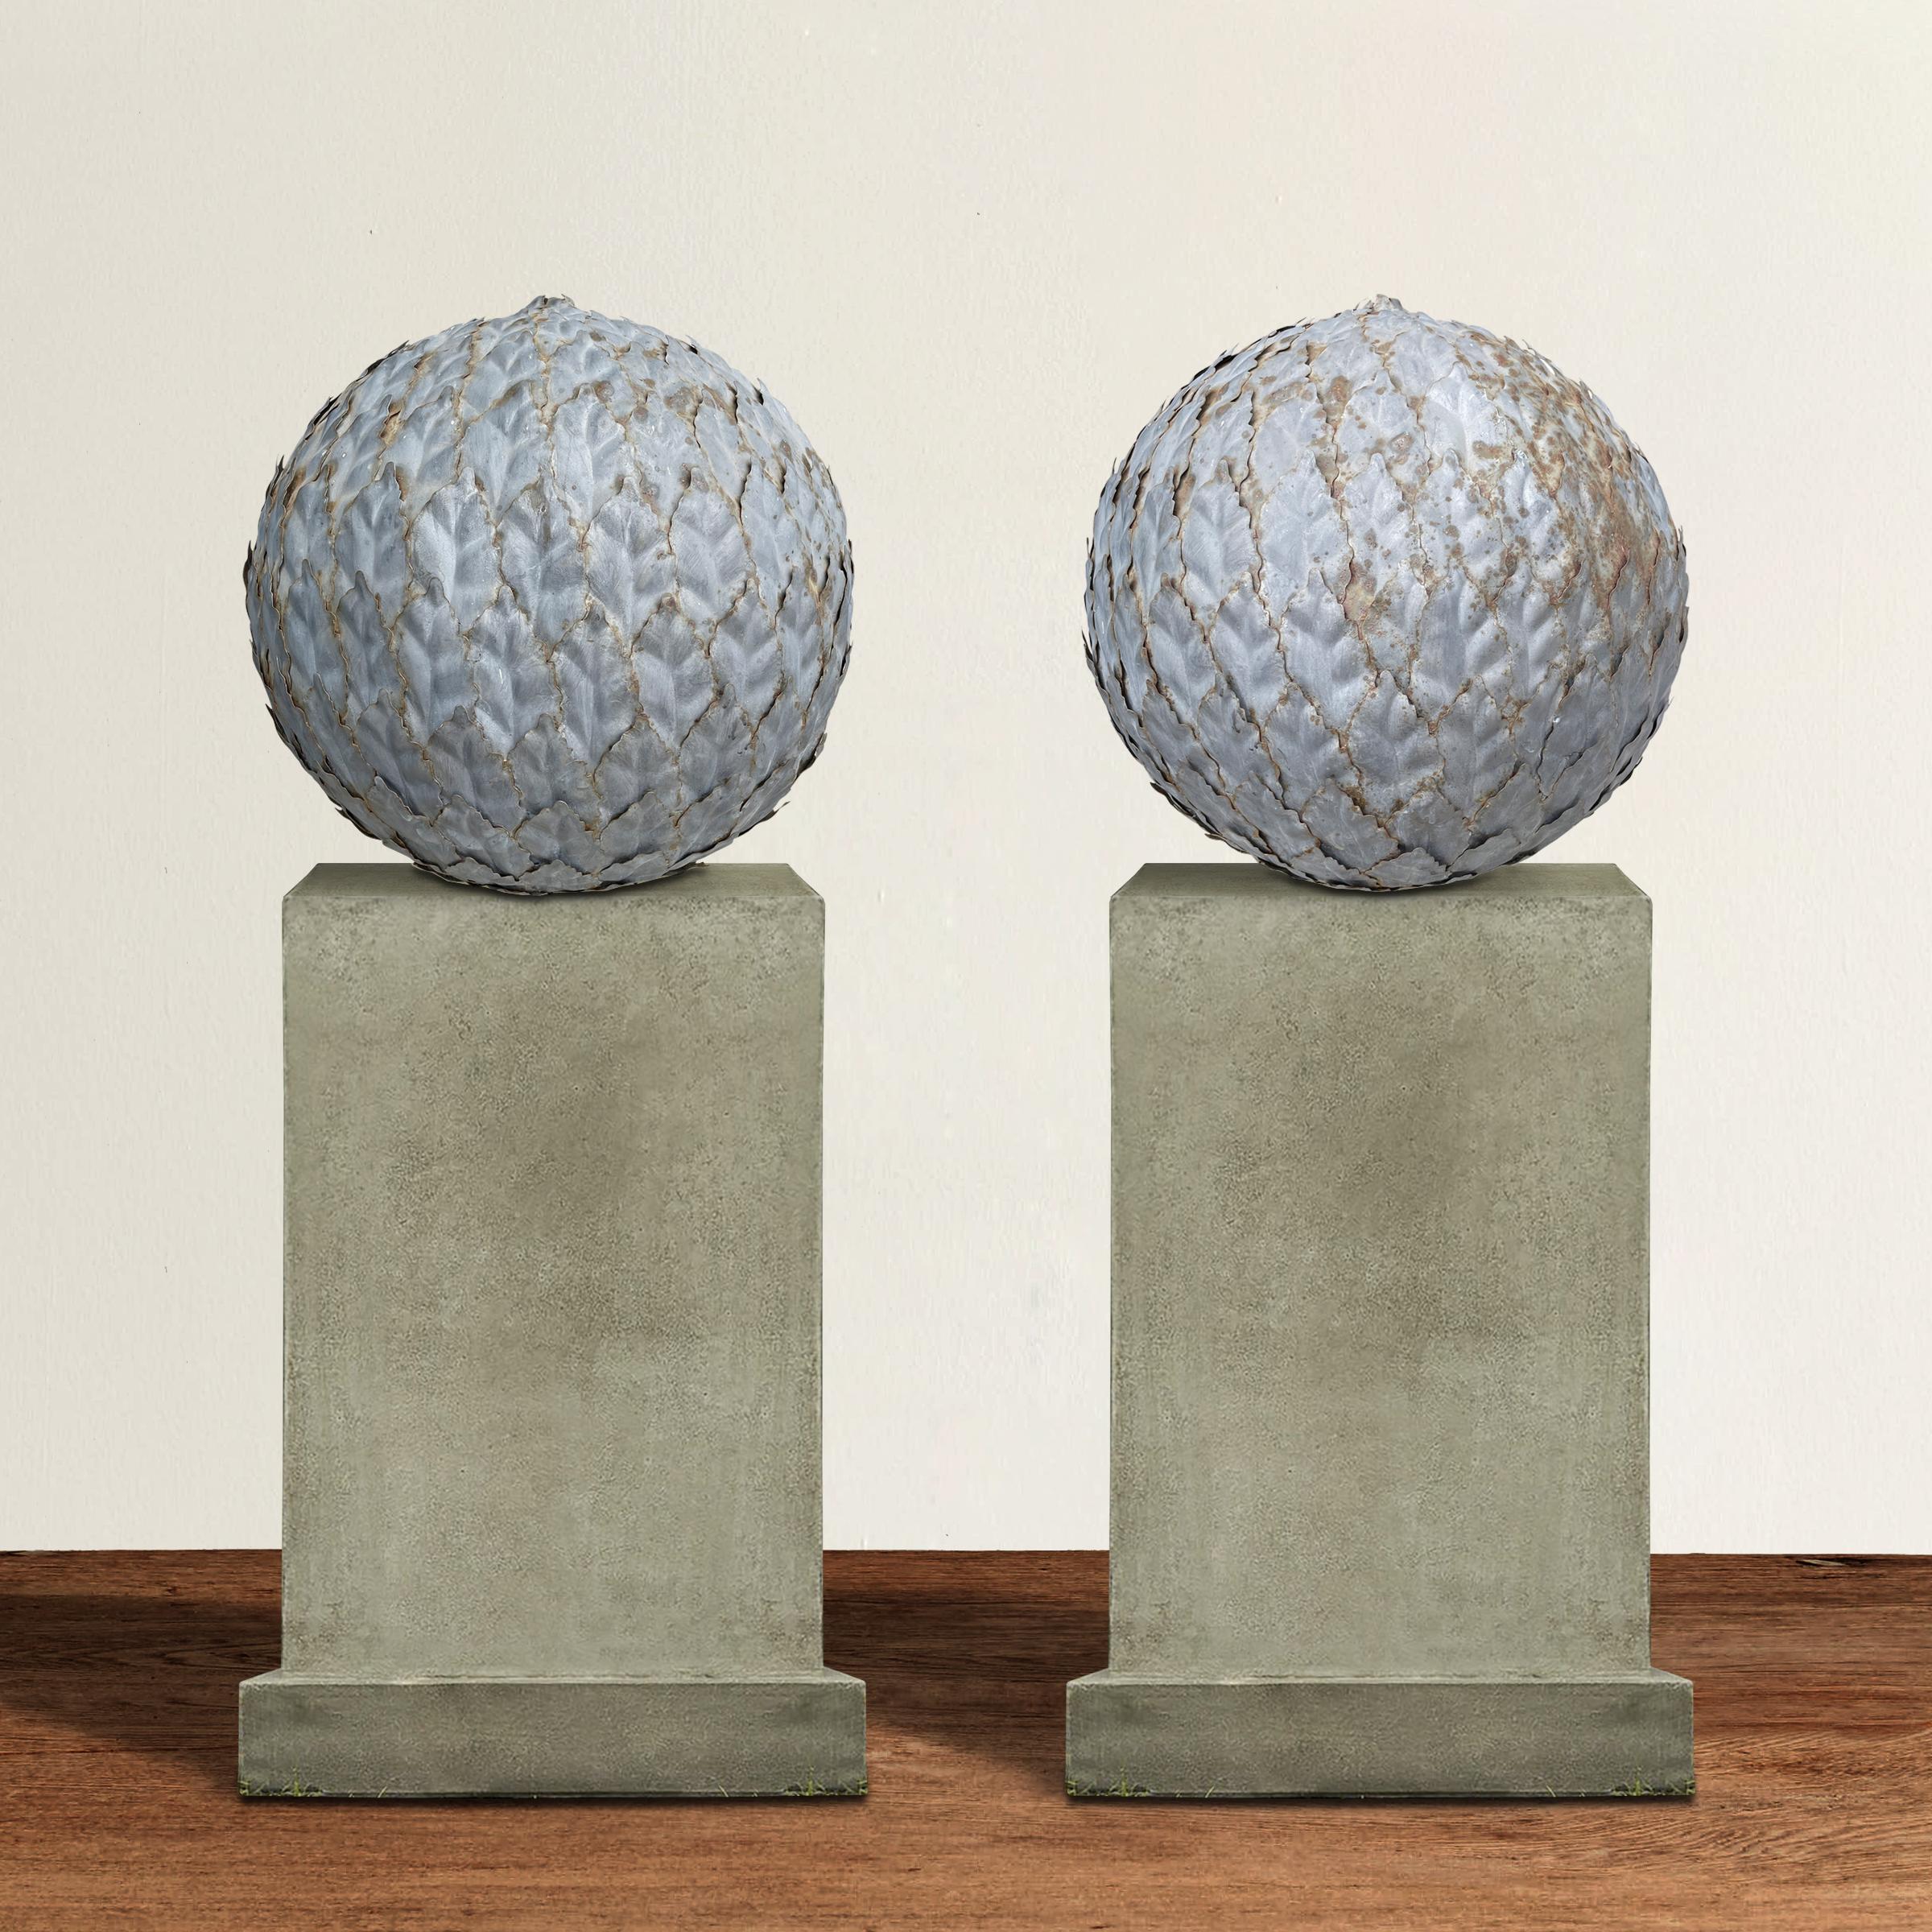 A wonderfully charming pair of 20th century English zinc garden spheres covered in laurel leaves and perfect for topping the columns flanking your driveway, placed along your garden path, or bring them indoors for a striking sculptural moment.